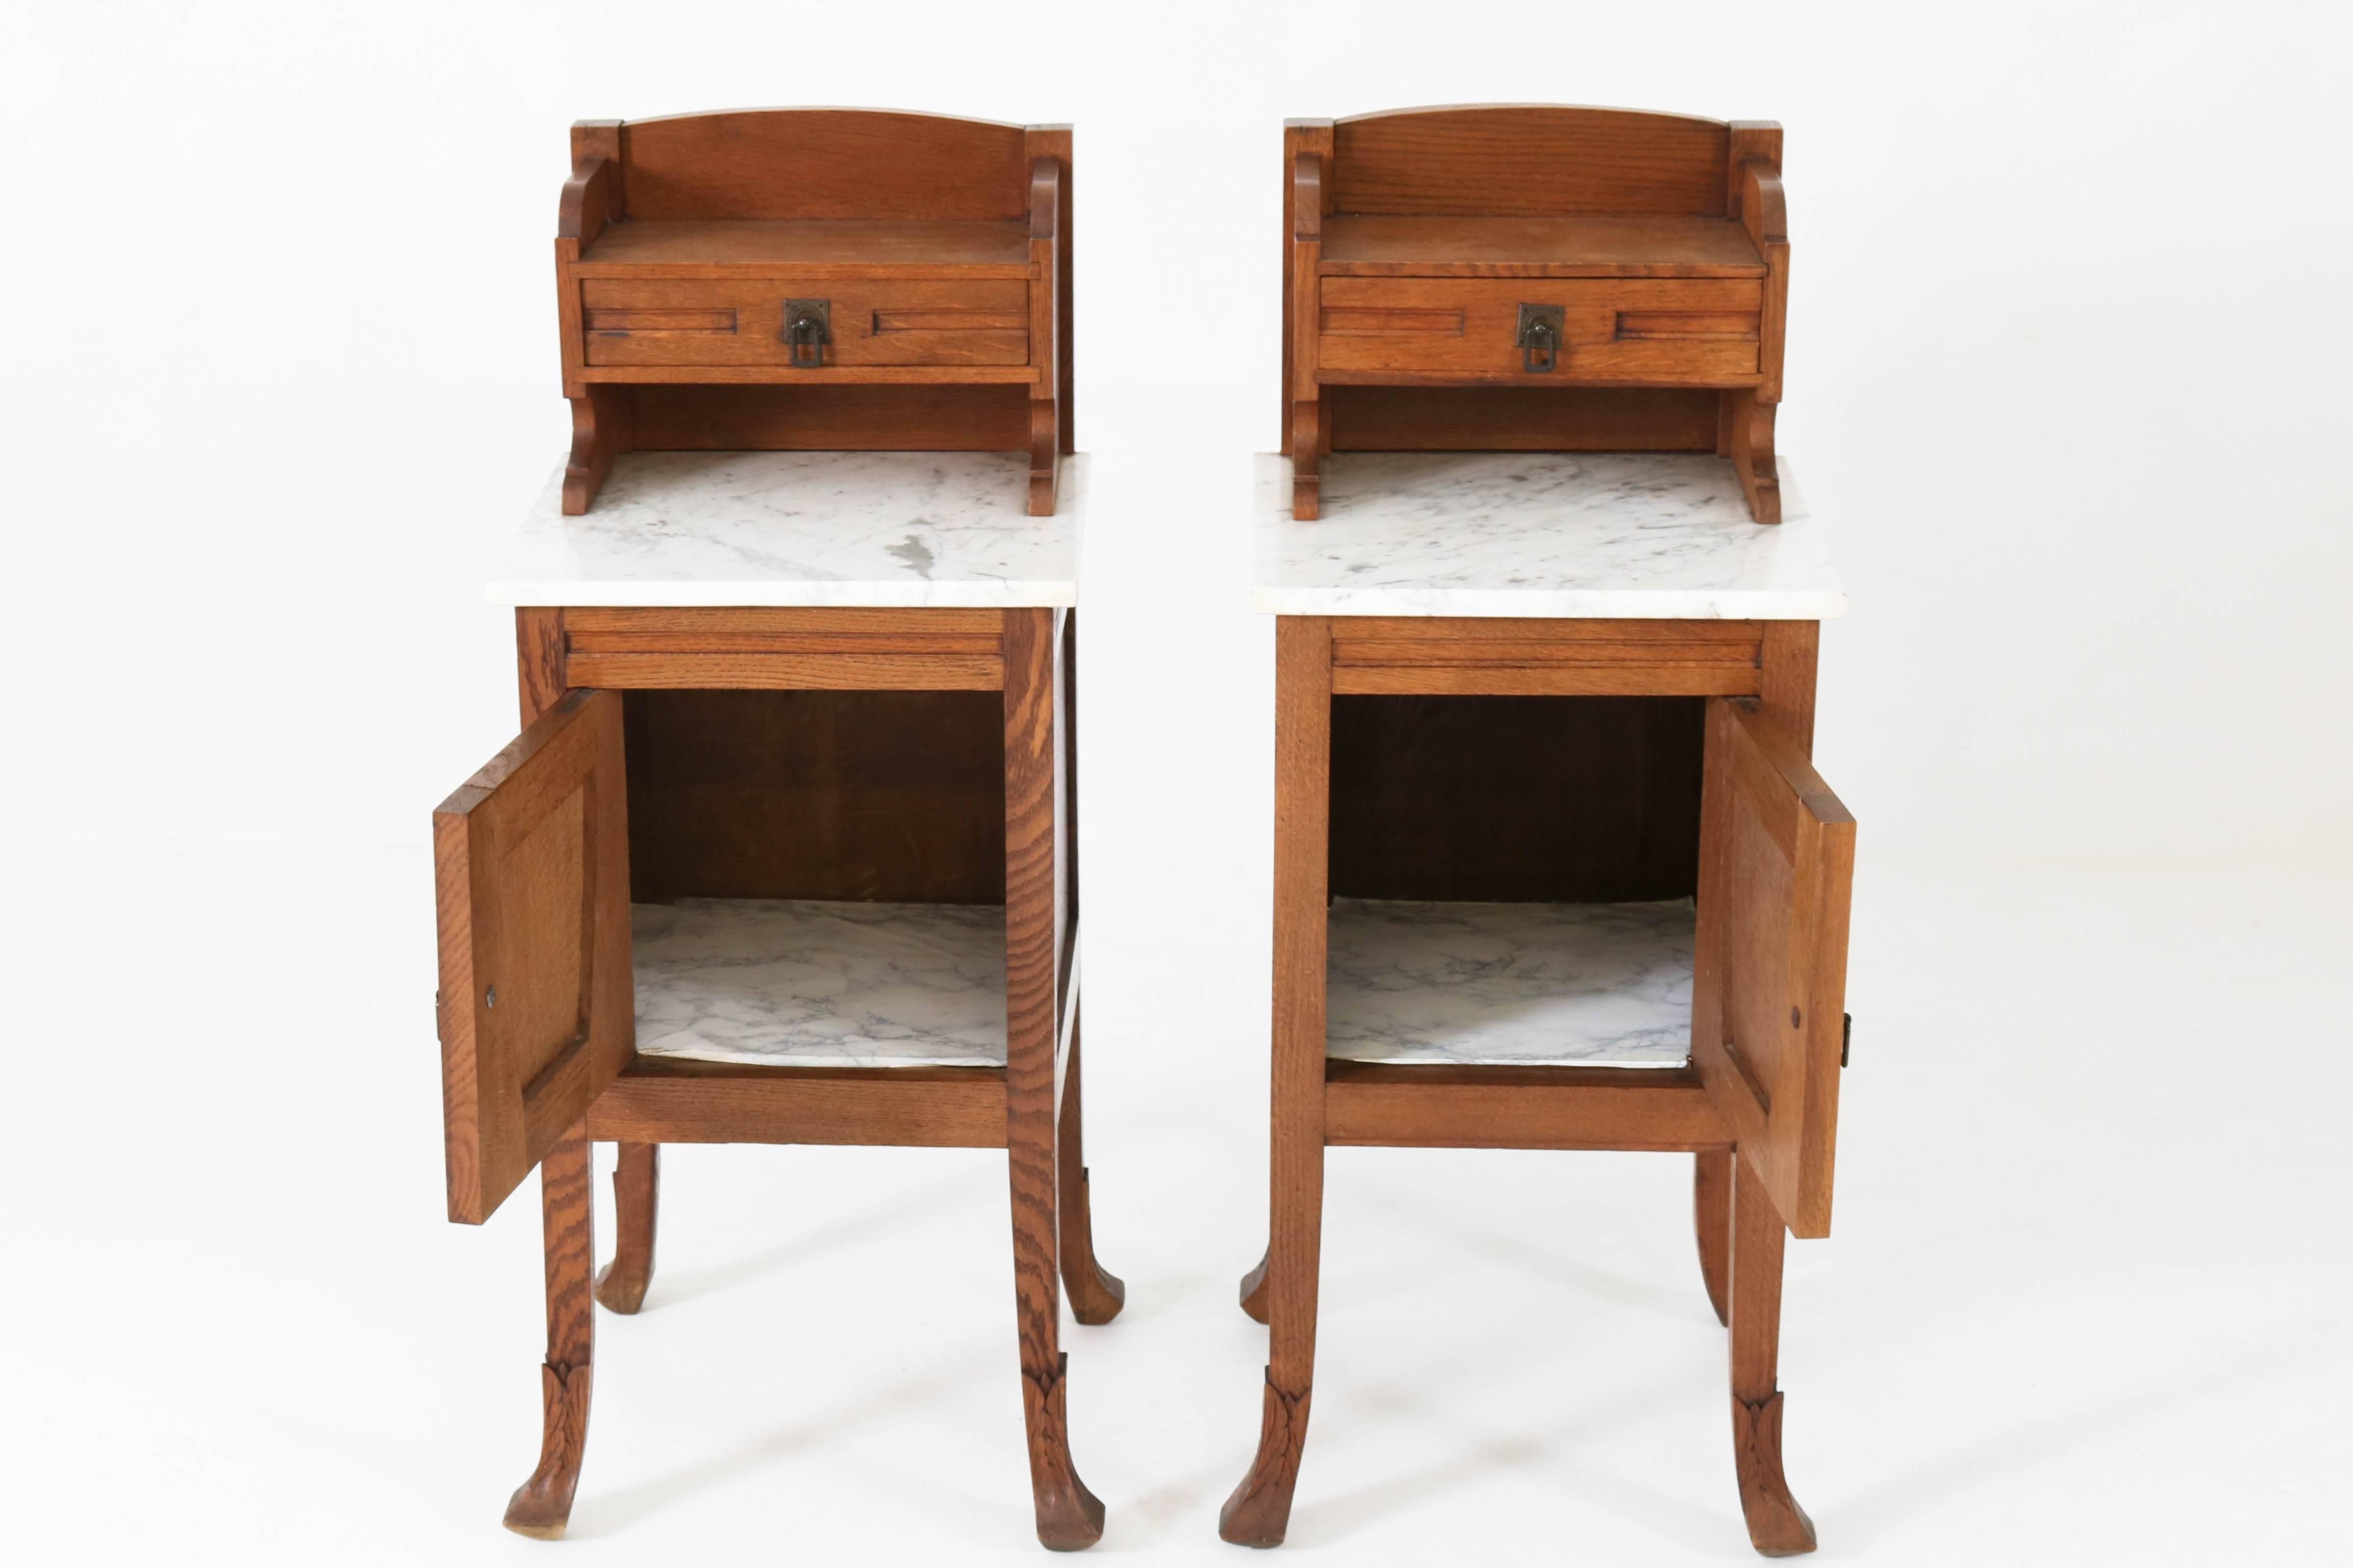 Wonderful pair of oak Dutch Art Nouveau nightstands, 1900s.
Solid oak with original marble tops.
Original brass handles on doors and drawers.
This pair is in very good condition with minor wear consistent with age and use,
preserving a beautiful